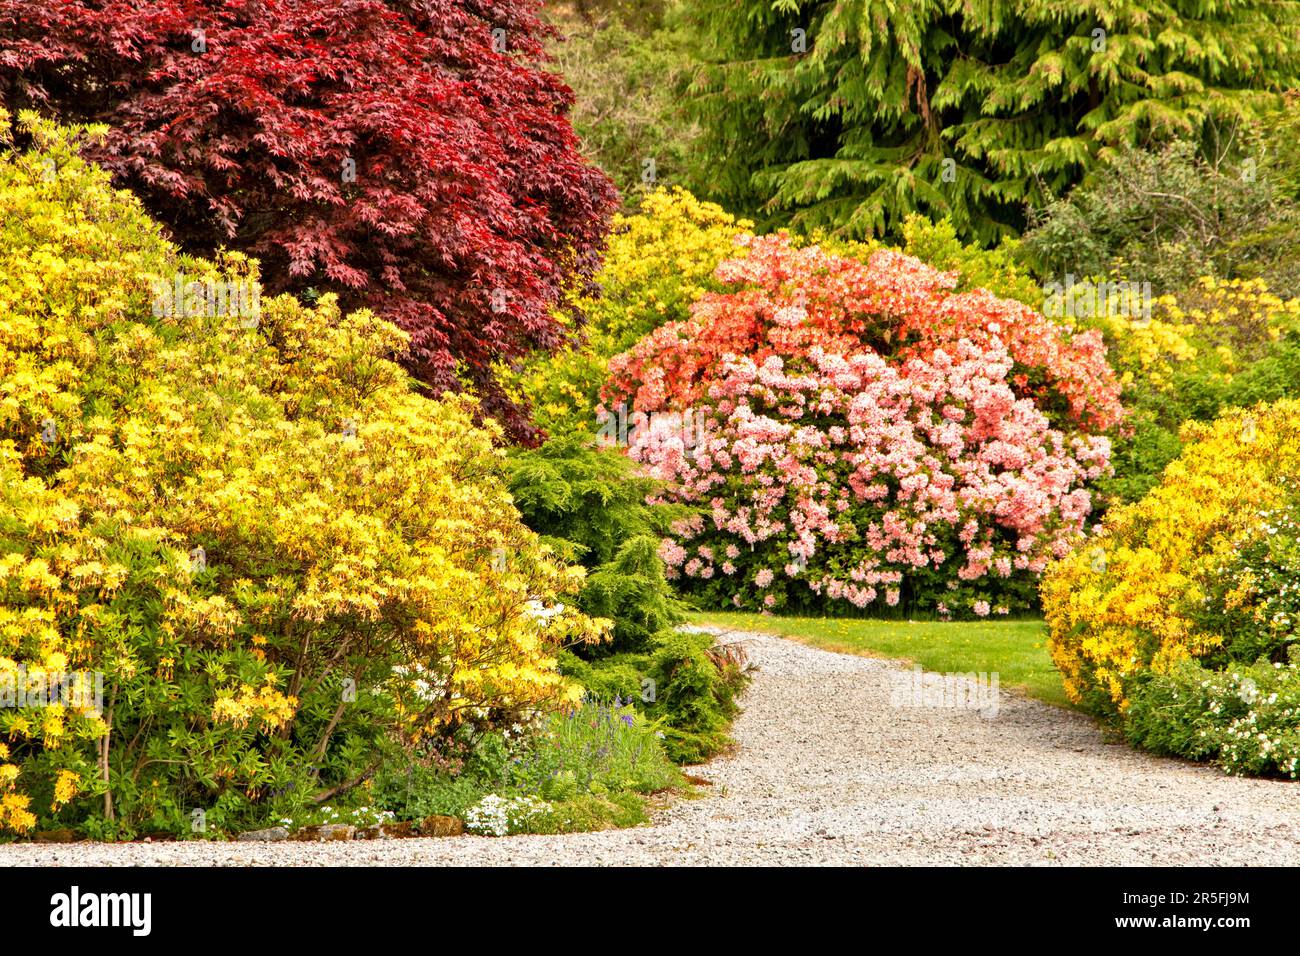 Attadale Gardens Wester Ross Scotland the gardens Acer tree yellow Azalea flowers and pink and orange Rhododendron flowers Stock Photo